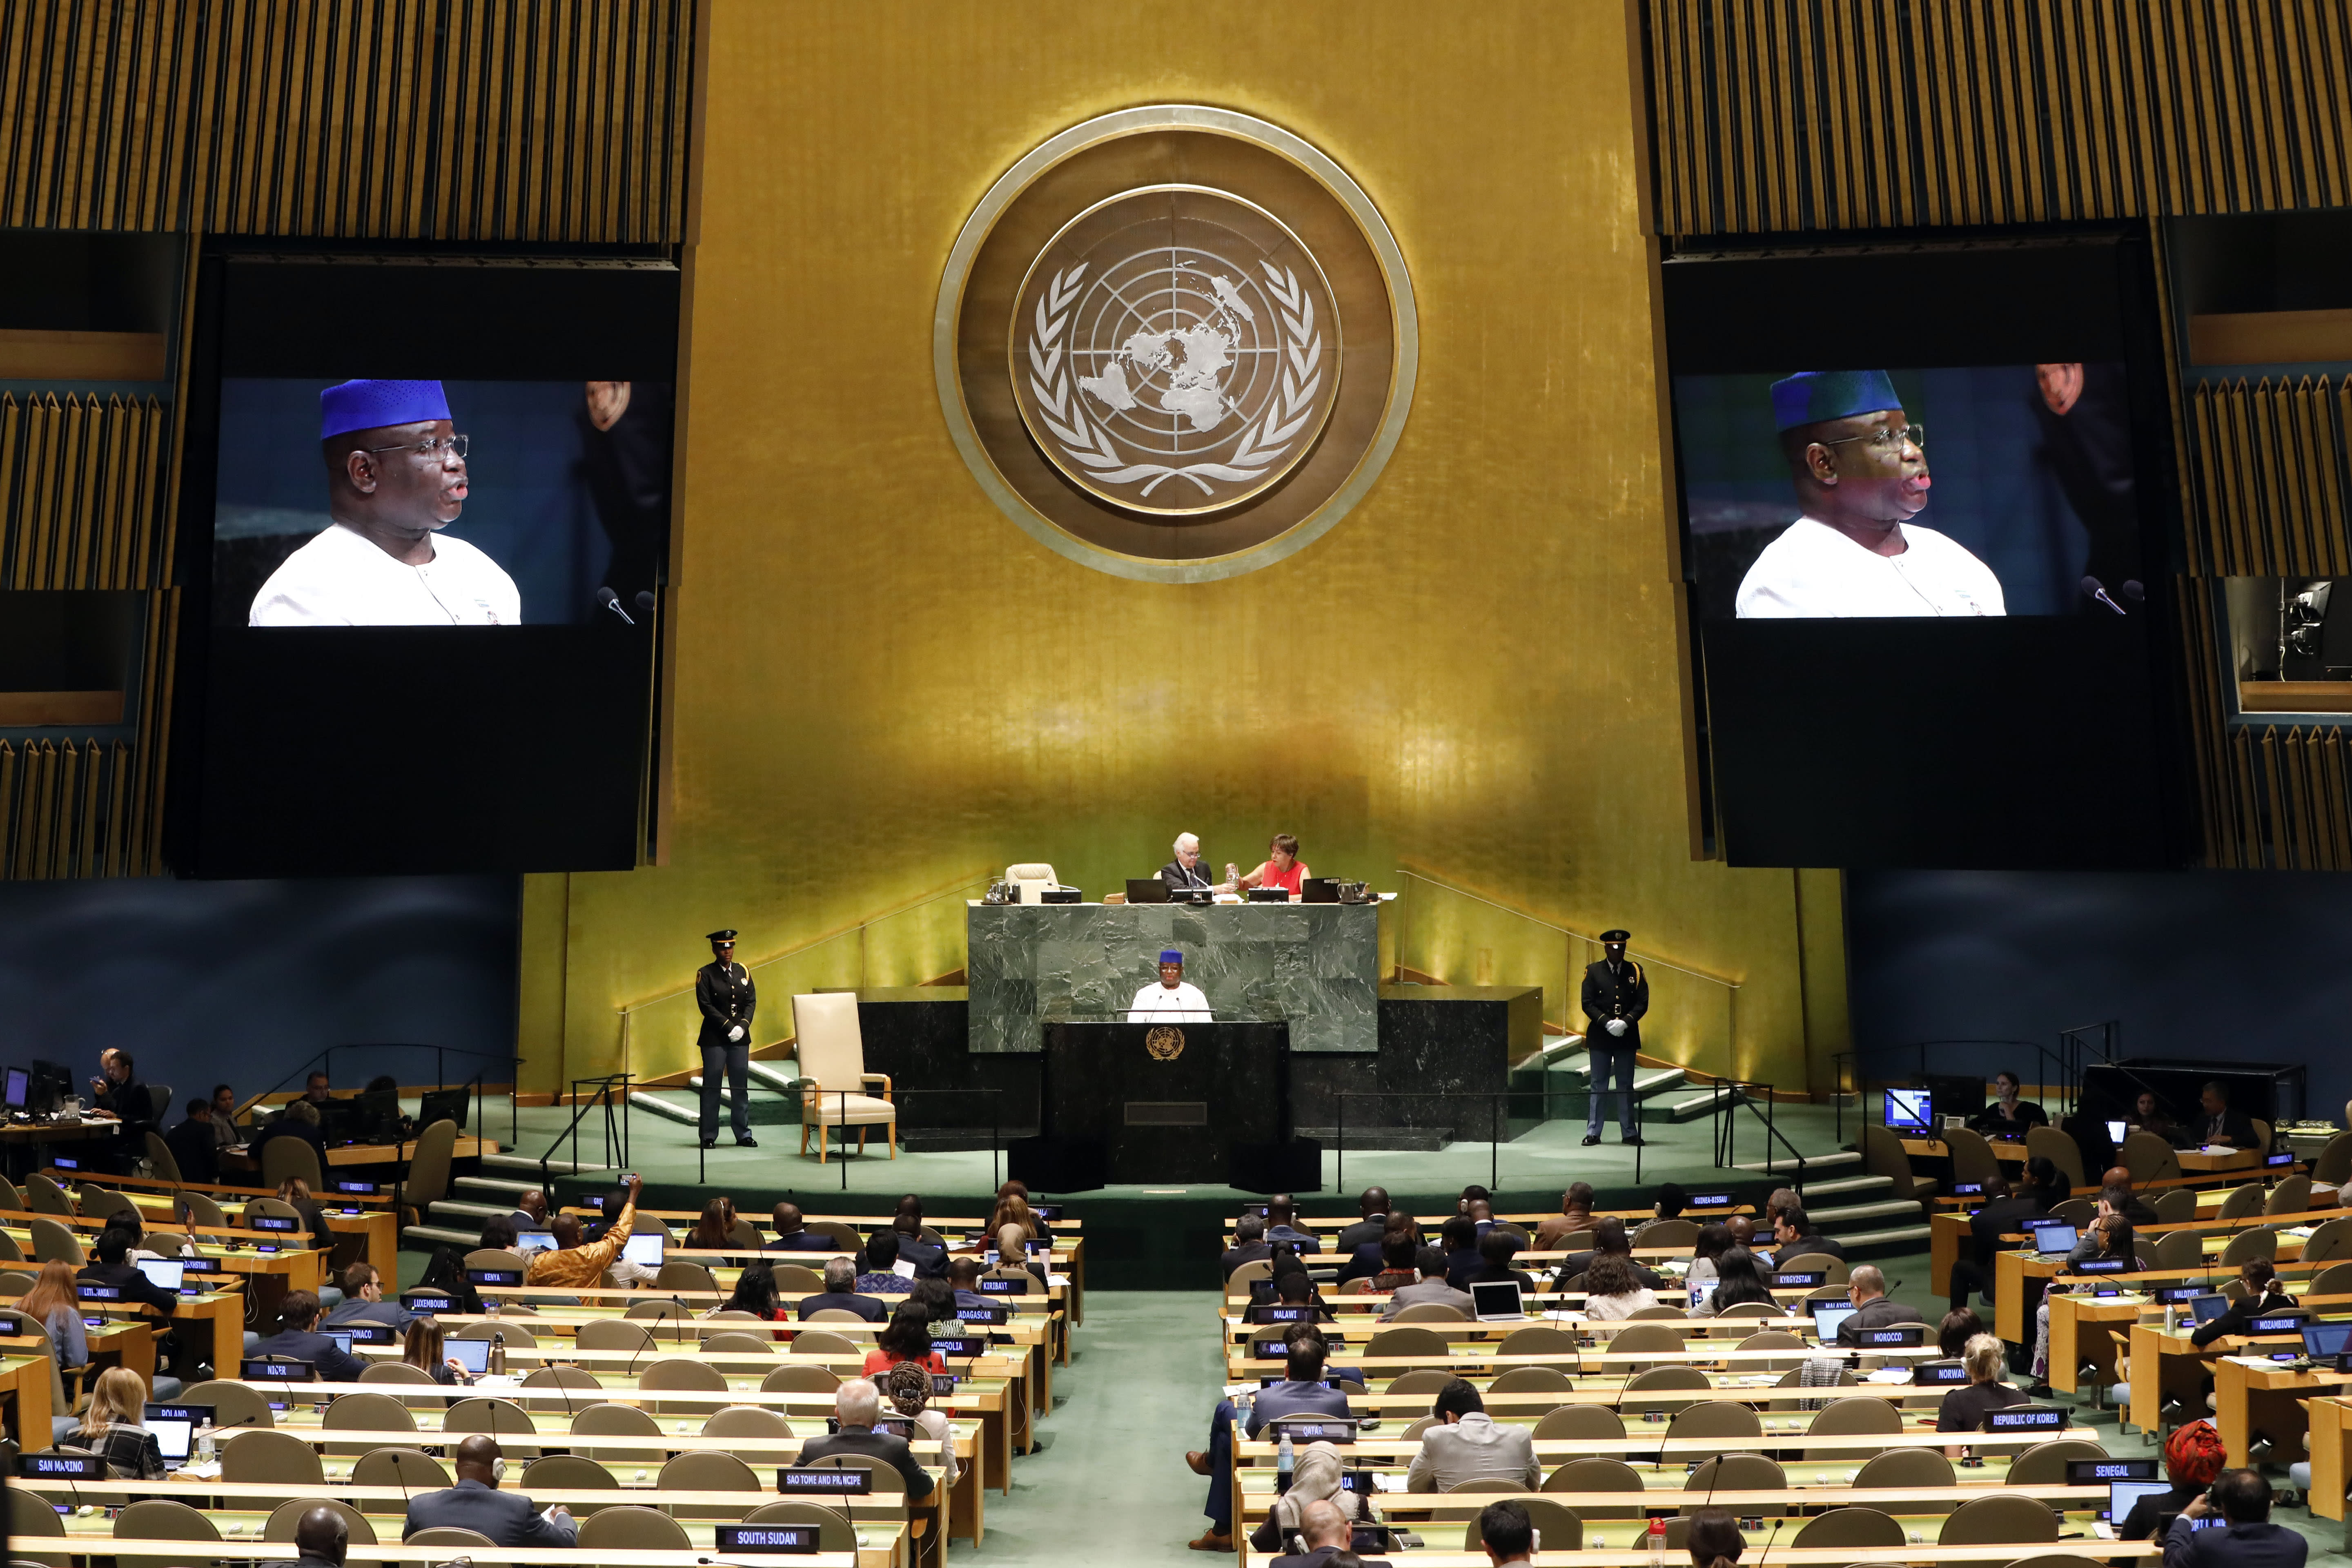 Sierra Leone leader Add Africa to UN Security Council now